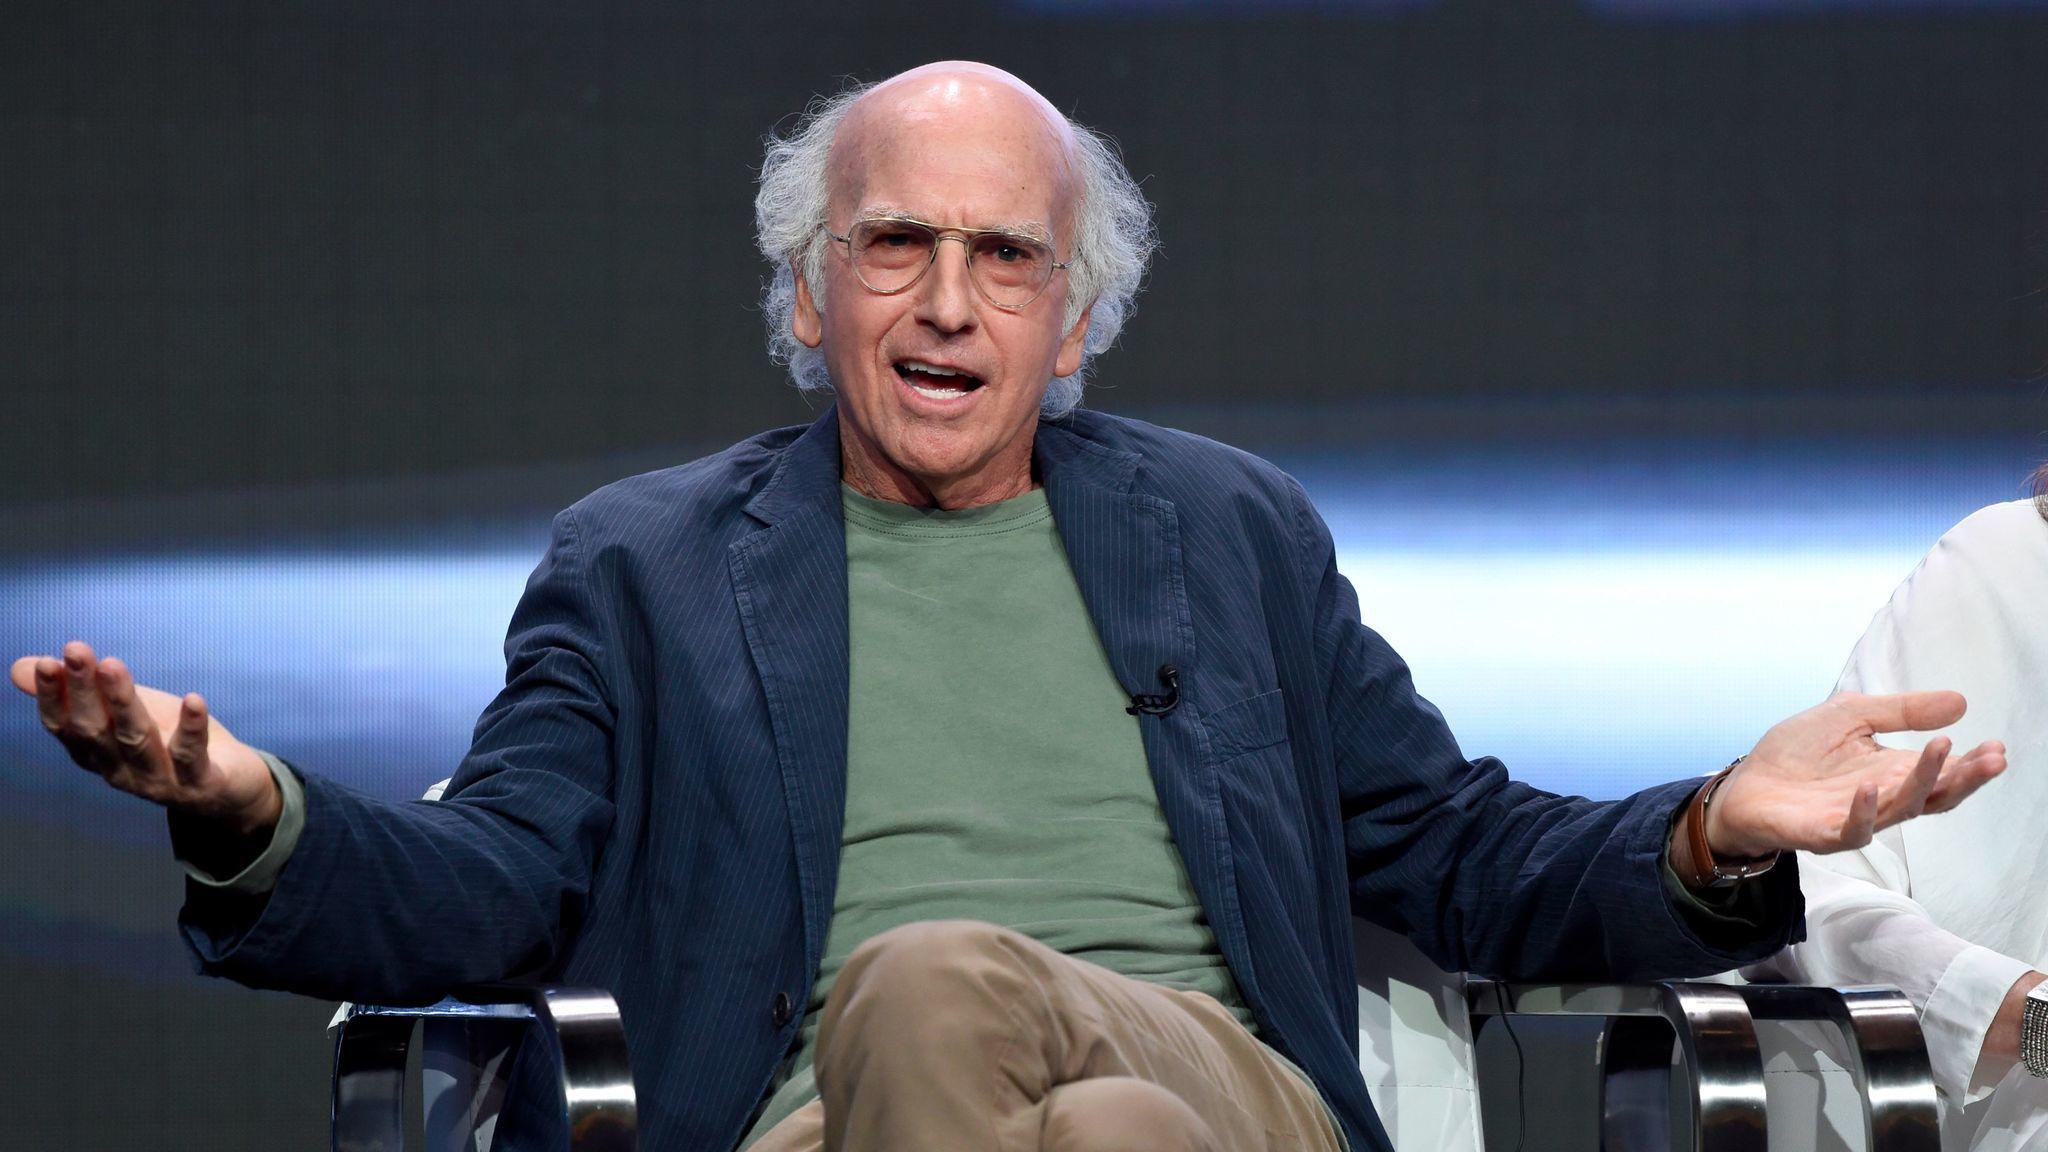 Curb Your Enthusiasm' returns this fall - and you can